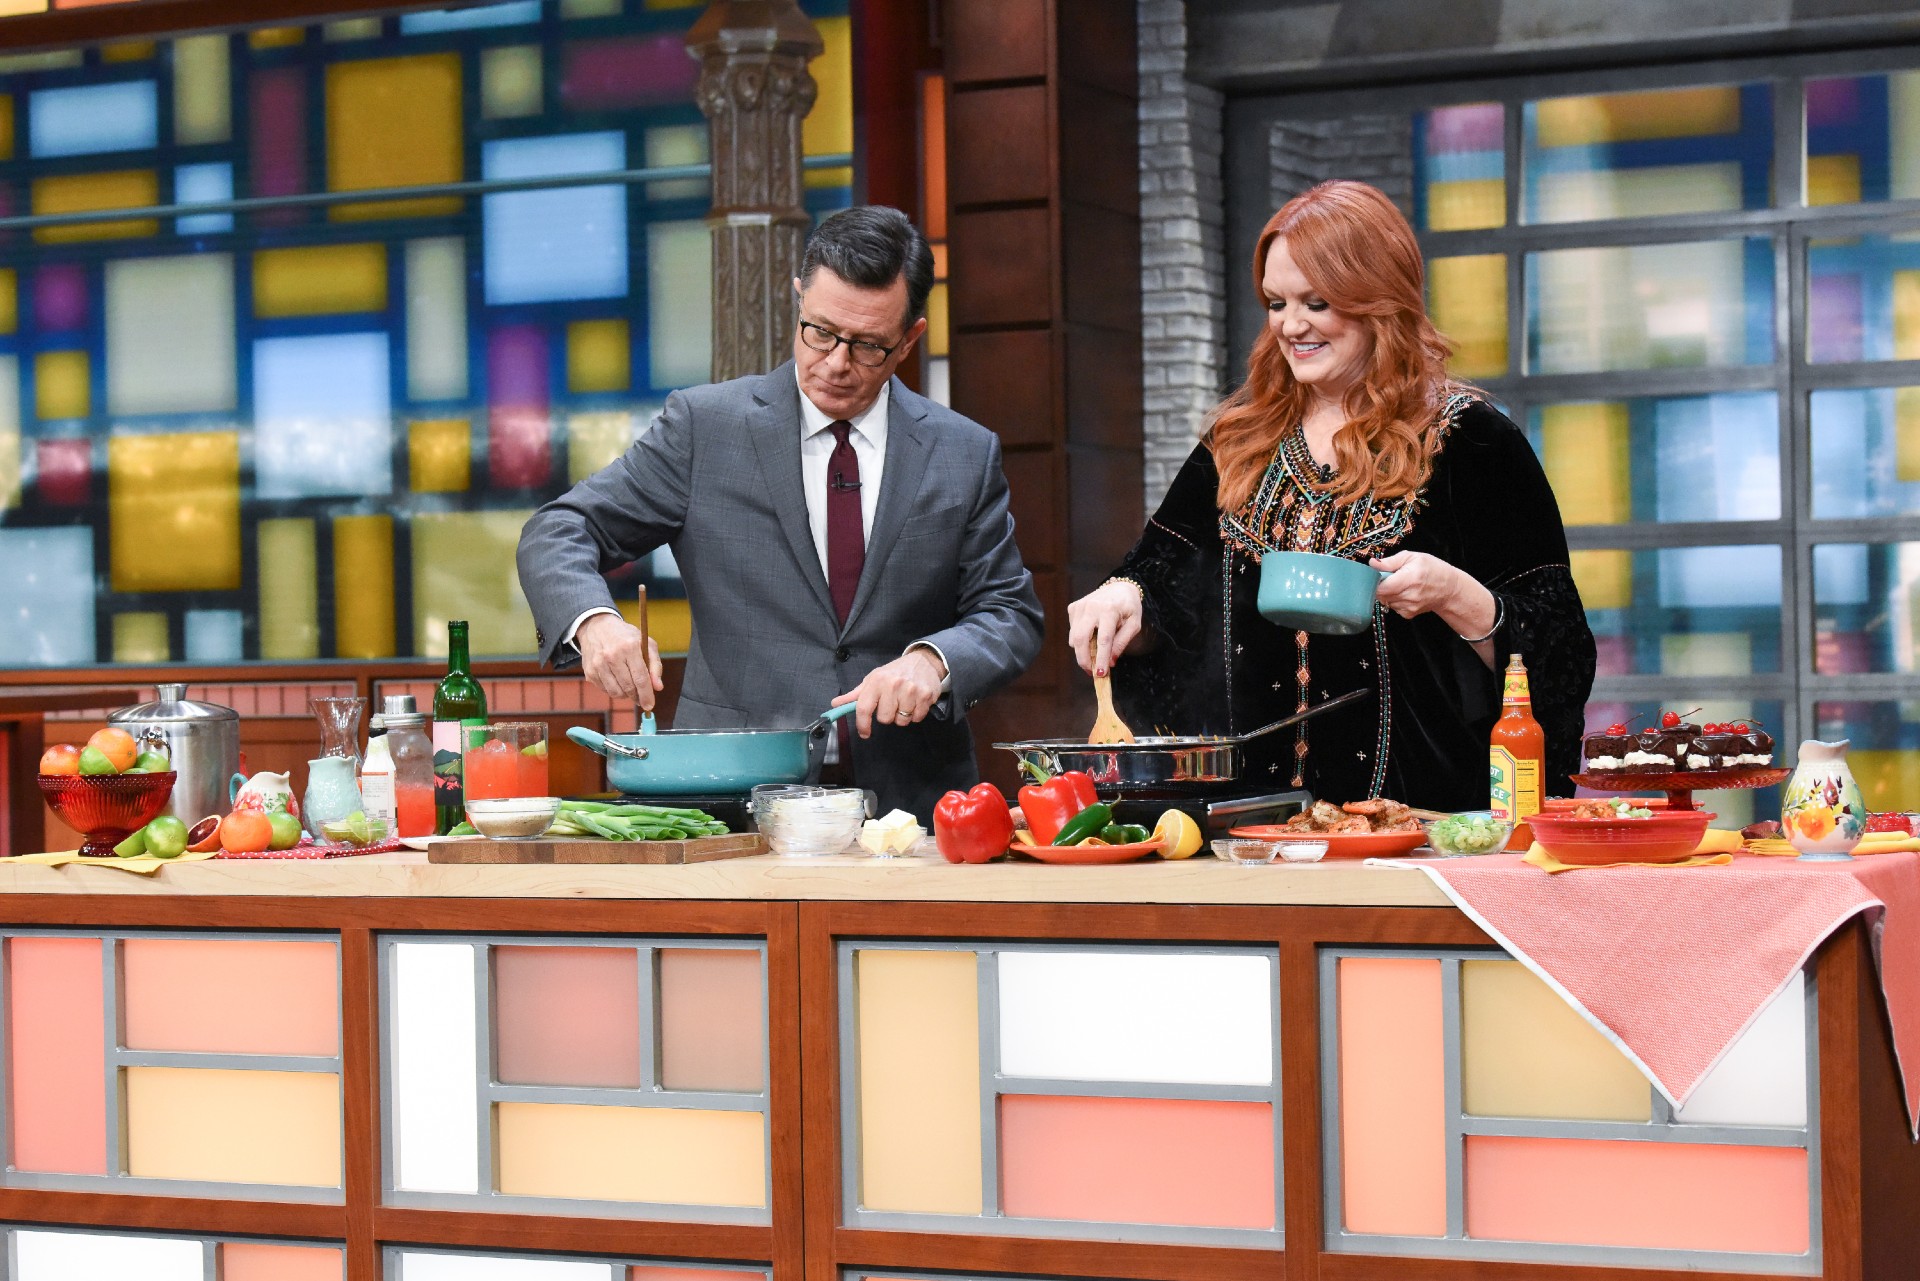 The Pioneer Woman star Ree Drummond wears a black top and cooks a meal with Stephen Colbert